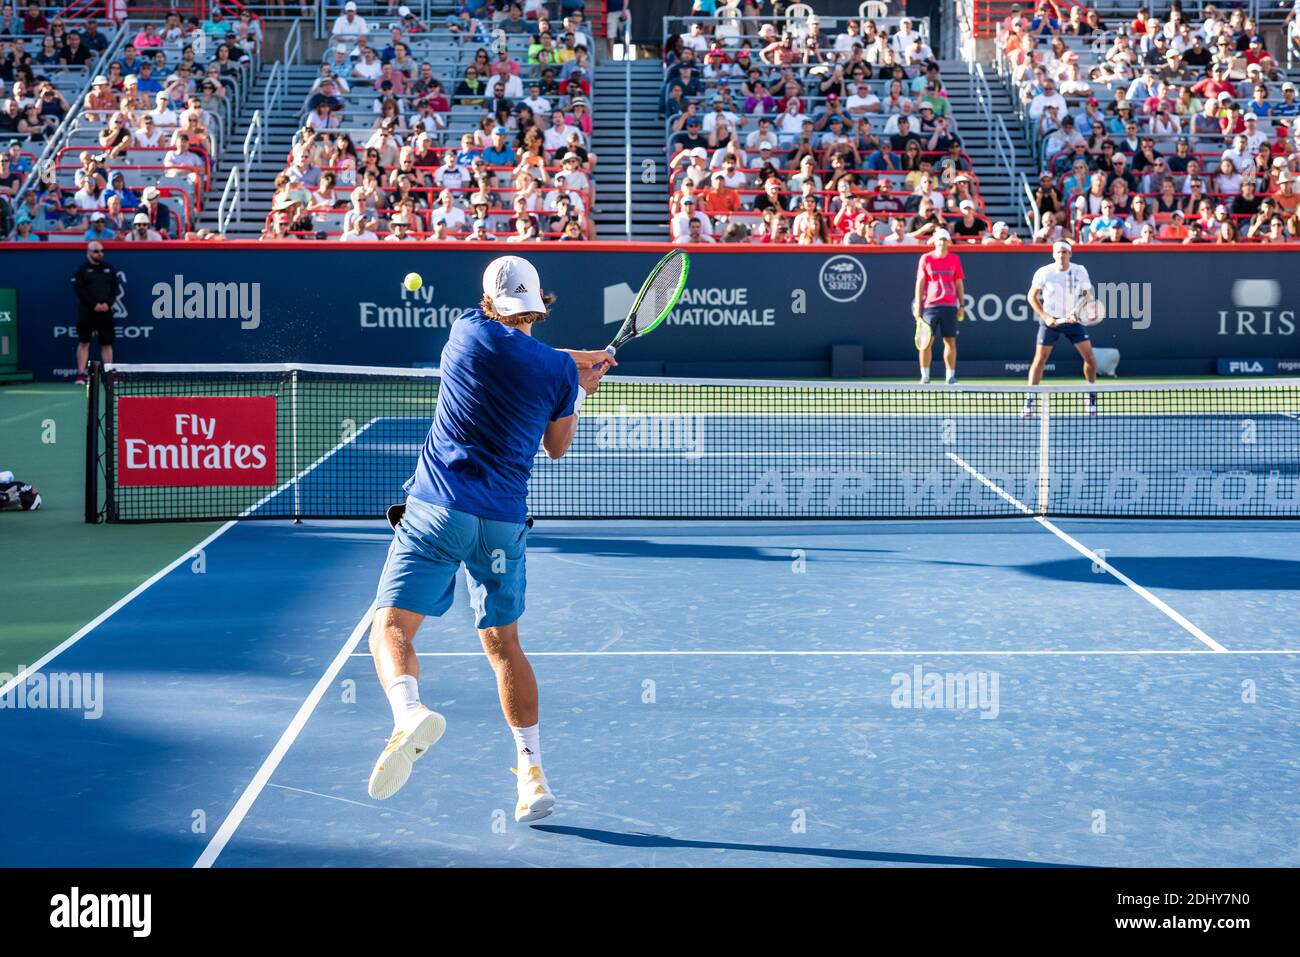 Montreal, Canada - Aujgust 5th, 2017: Lucas Pouille practicing in the central court during the Rogers Cup. Stock Photo